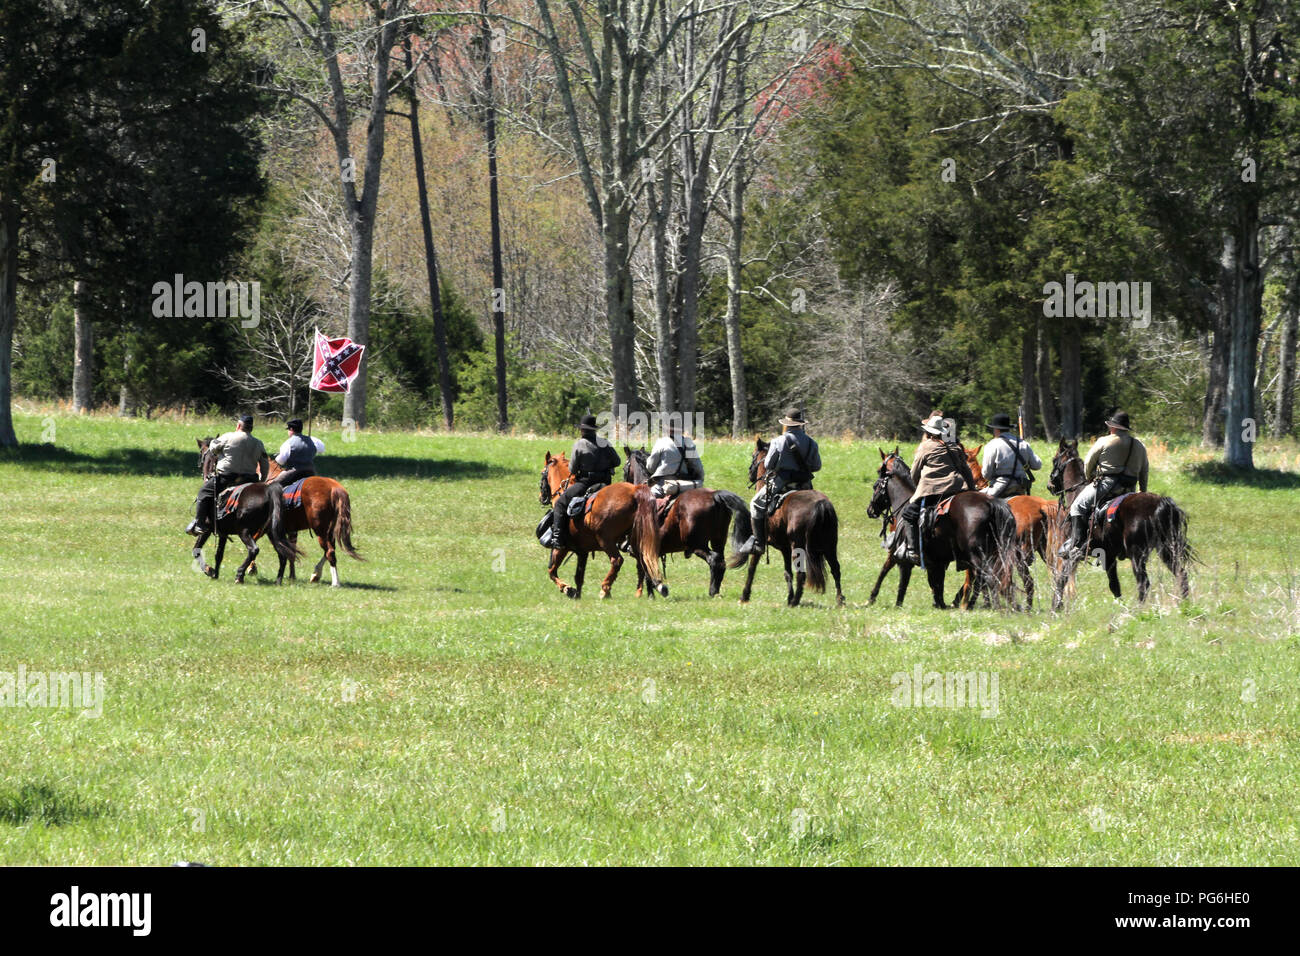 The Confederate States Army (C.S.A.). Cavalry with Confederate flag. Historical reenactment at Appomattox Court House, VA, USA. Stock Photo